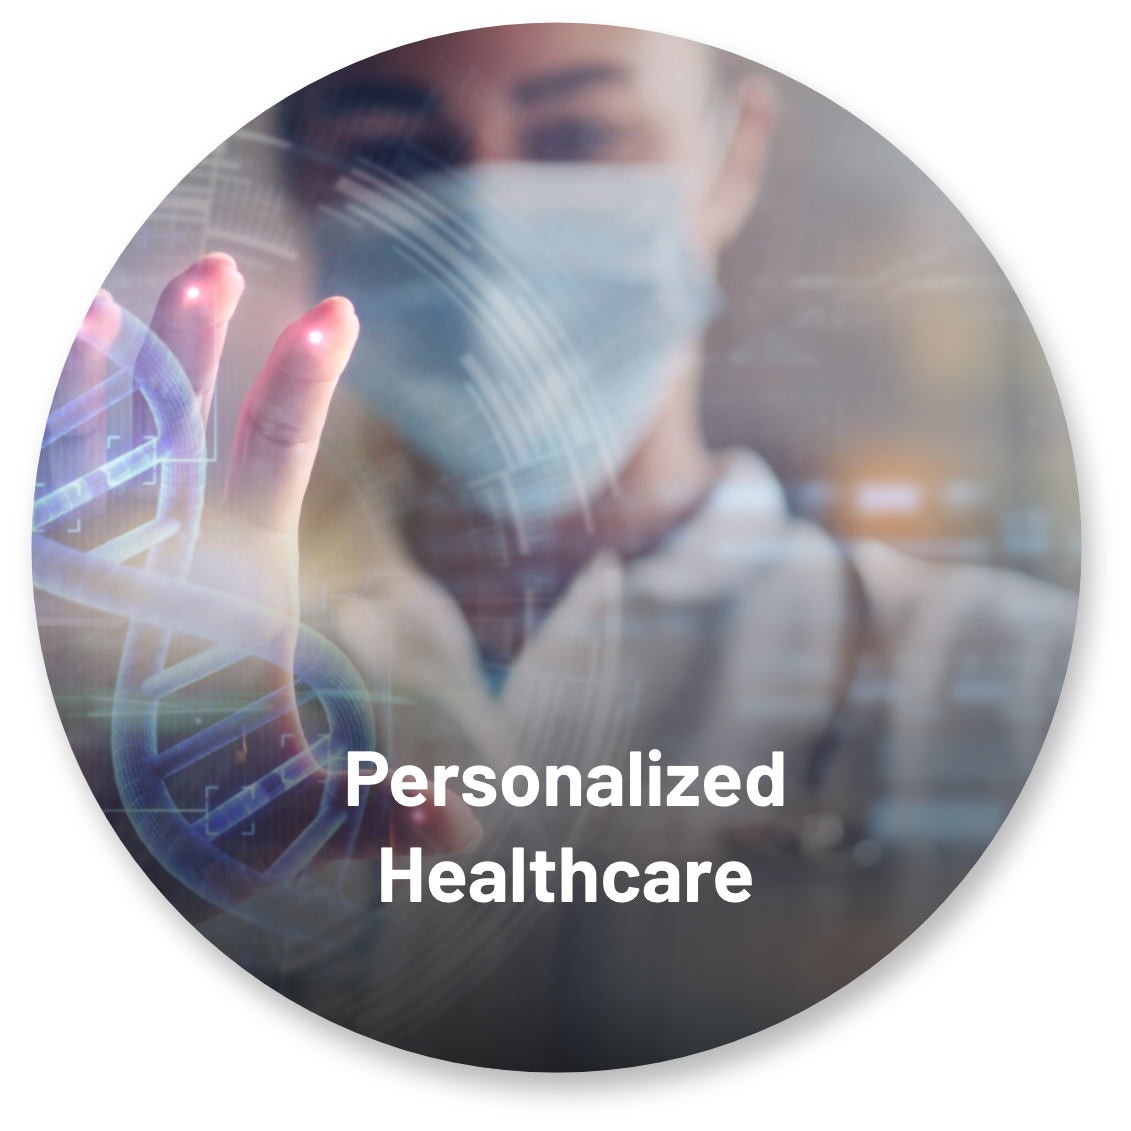 Personalized Healthcare - Click to learn more.